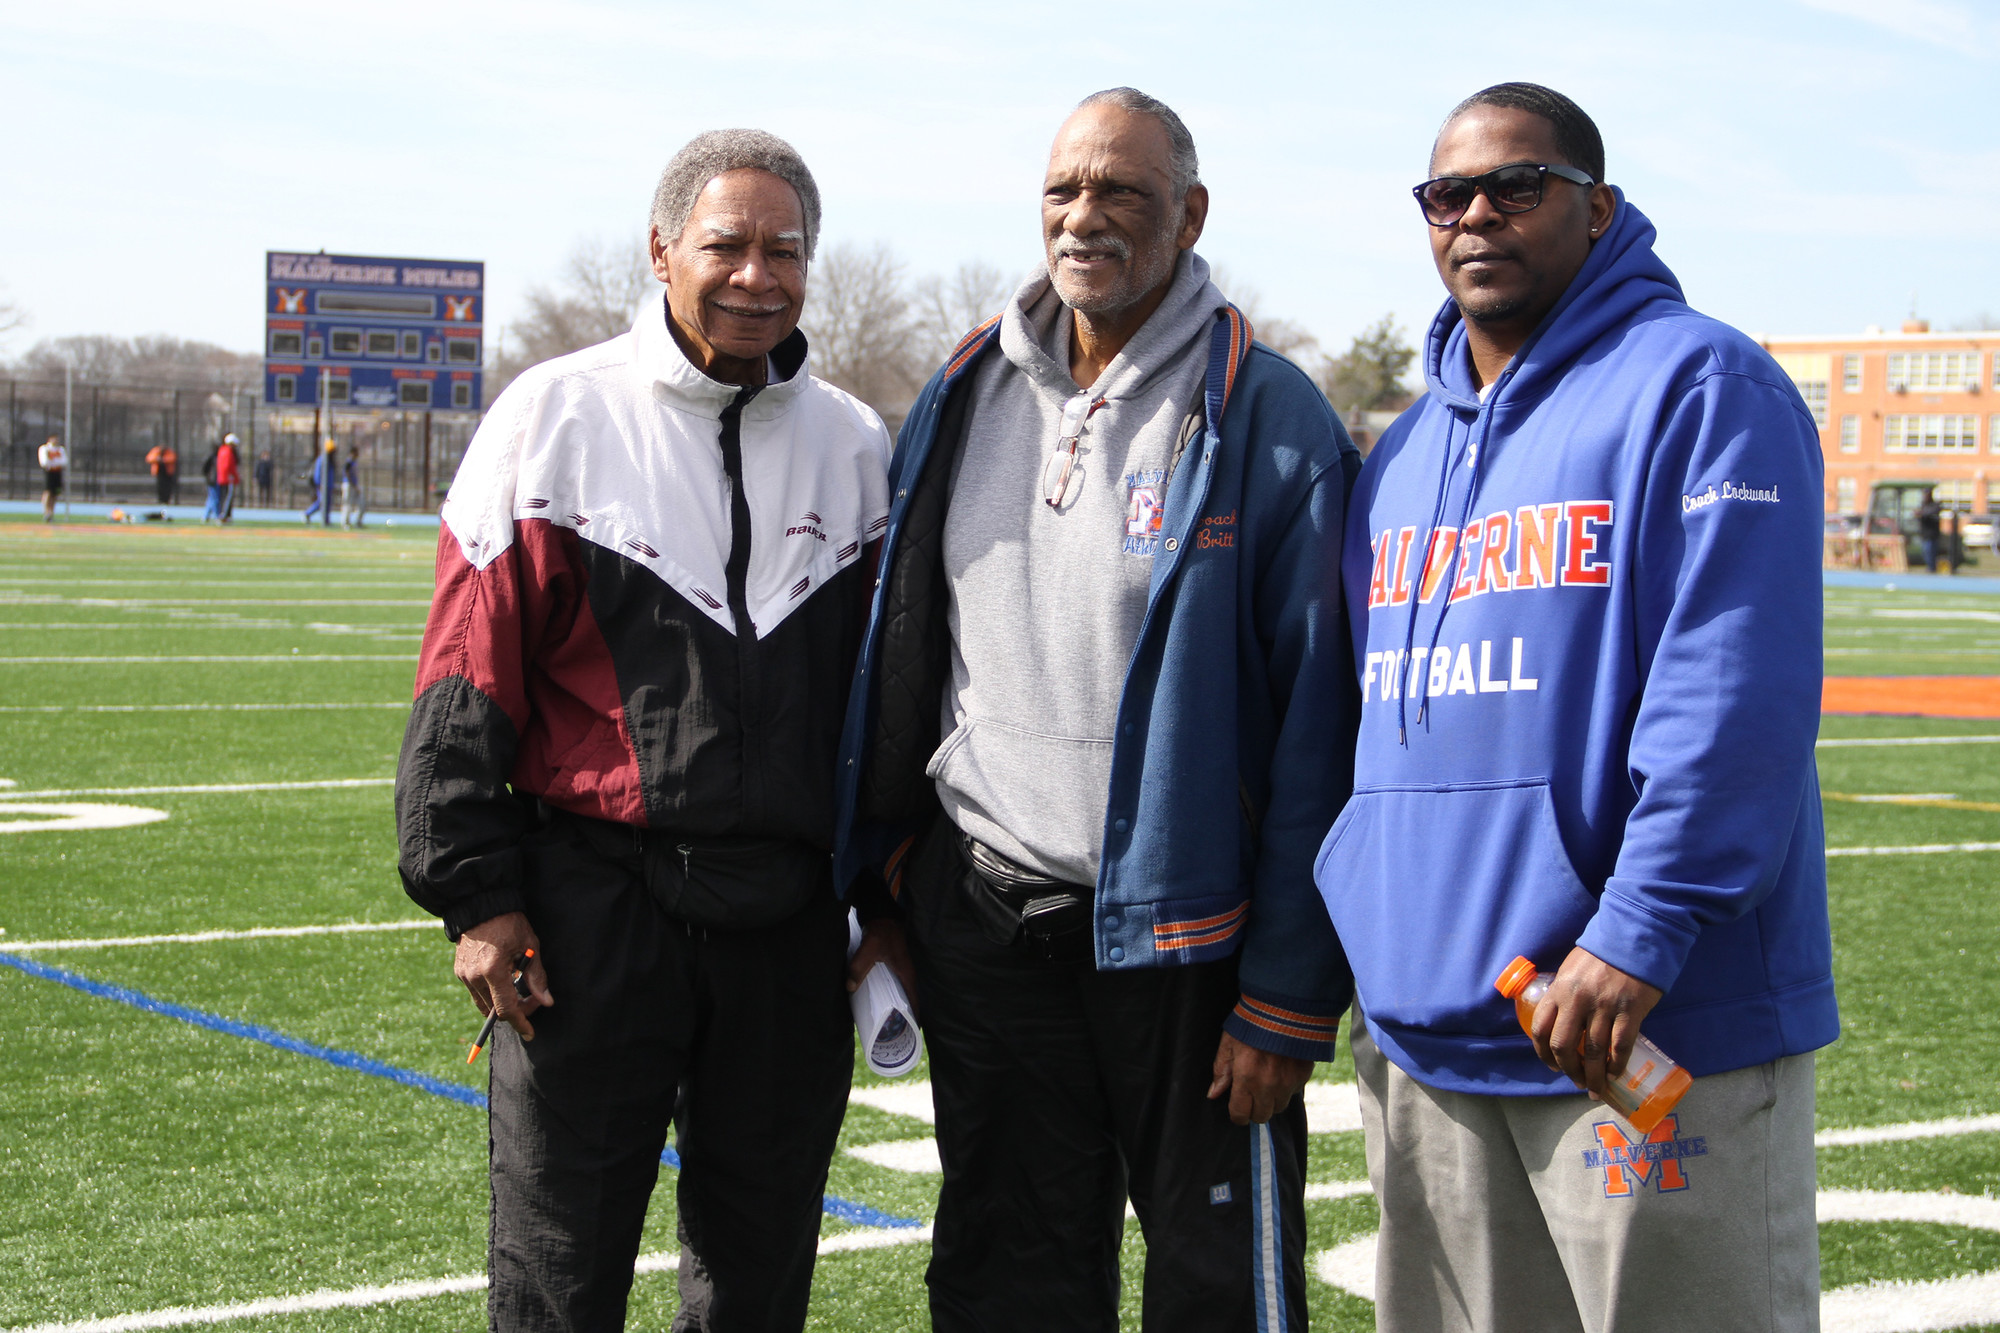 Colbert Britt, center, is flanked by Charles Nanton of the Lakeview Youth Federation, left, and Kito Lockwood, football coach at Malverne High School. The photo was taken at an event honoring Britt for his years of service in the community.